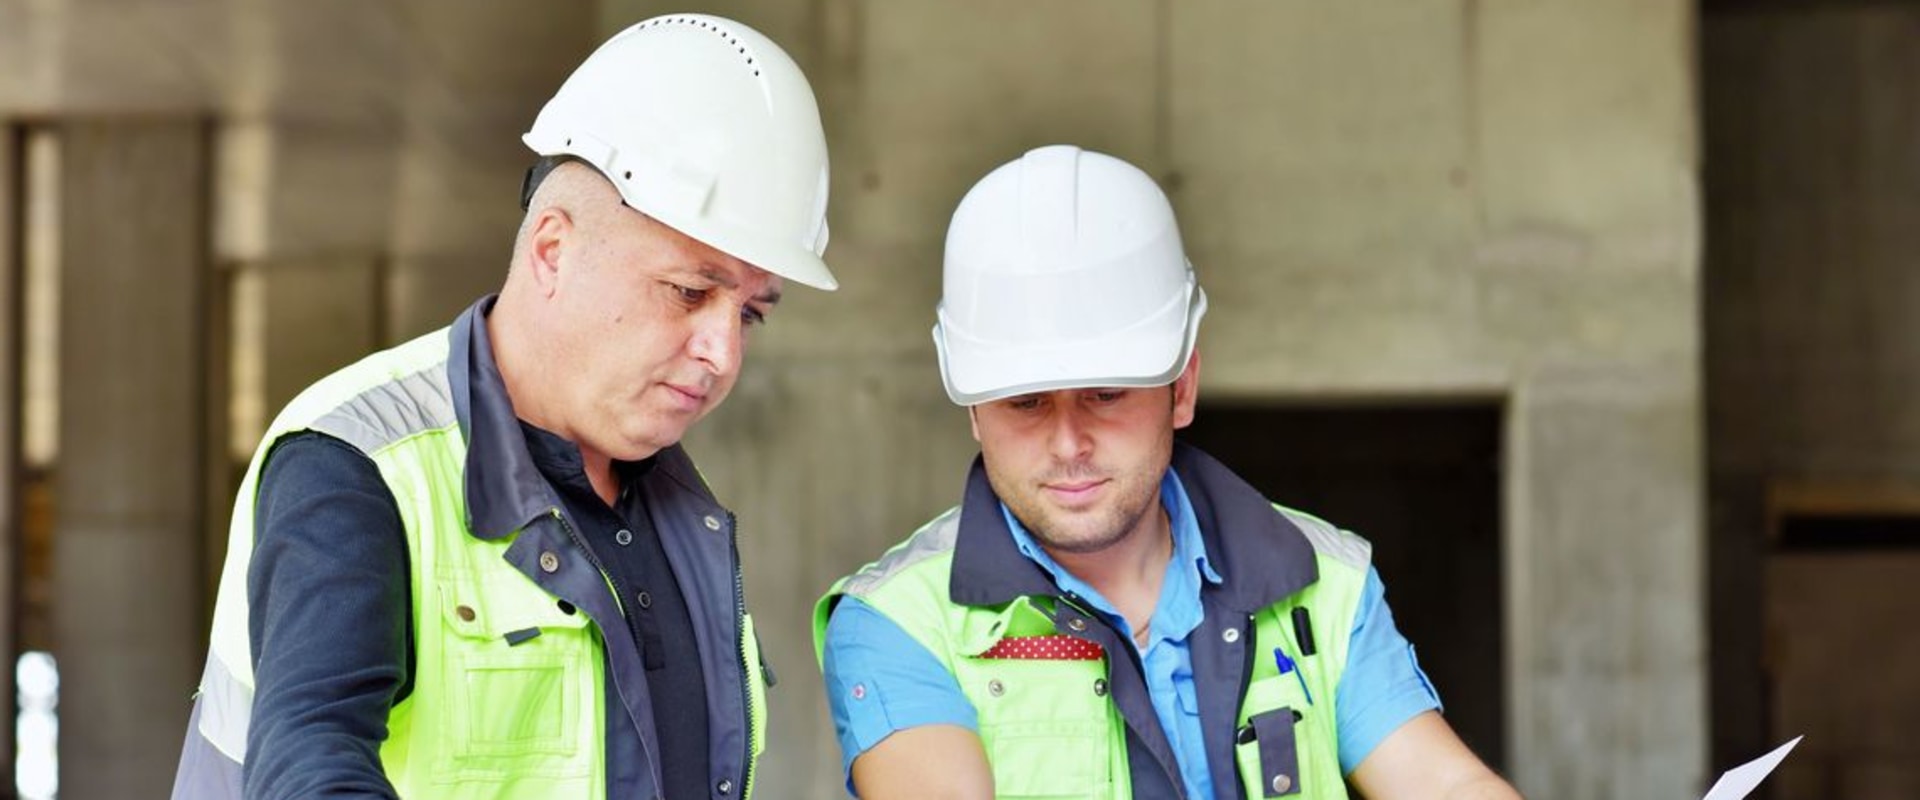 Are civil engineering jobs in demand?